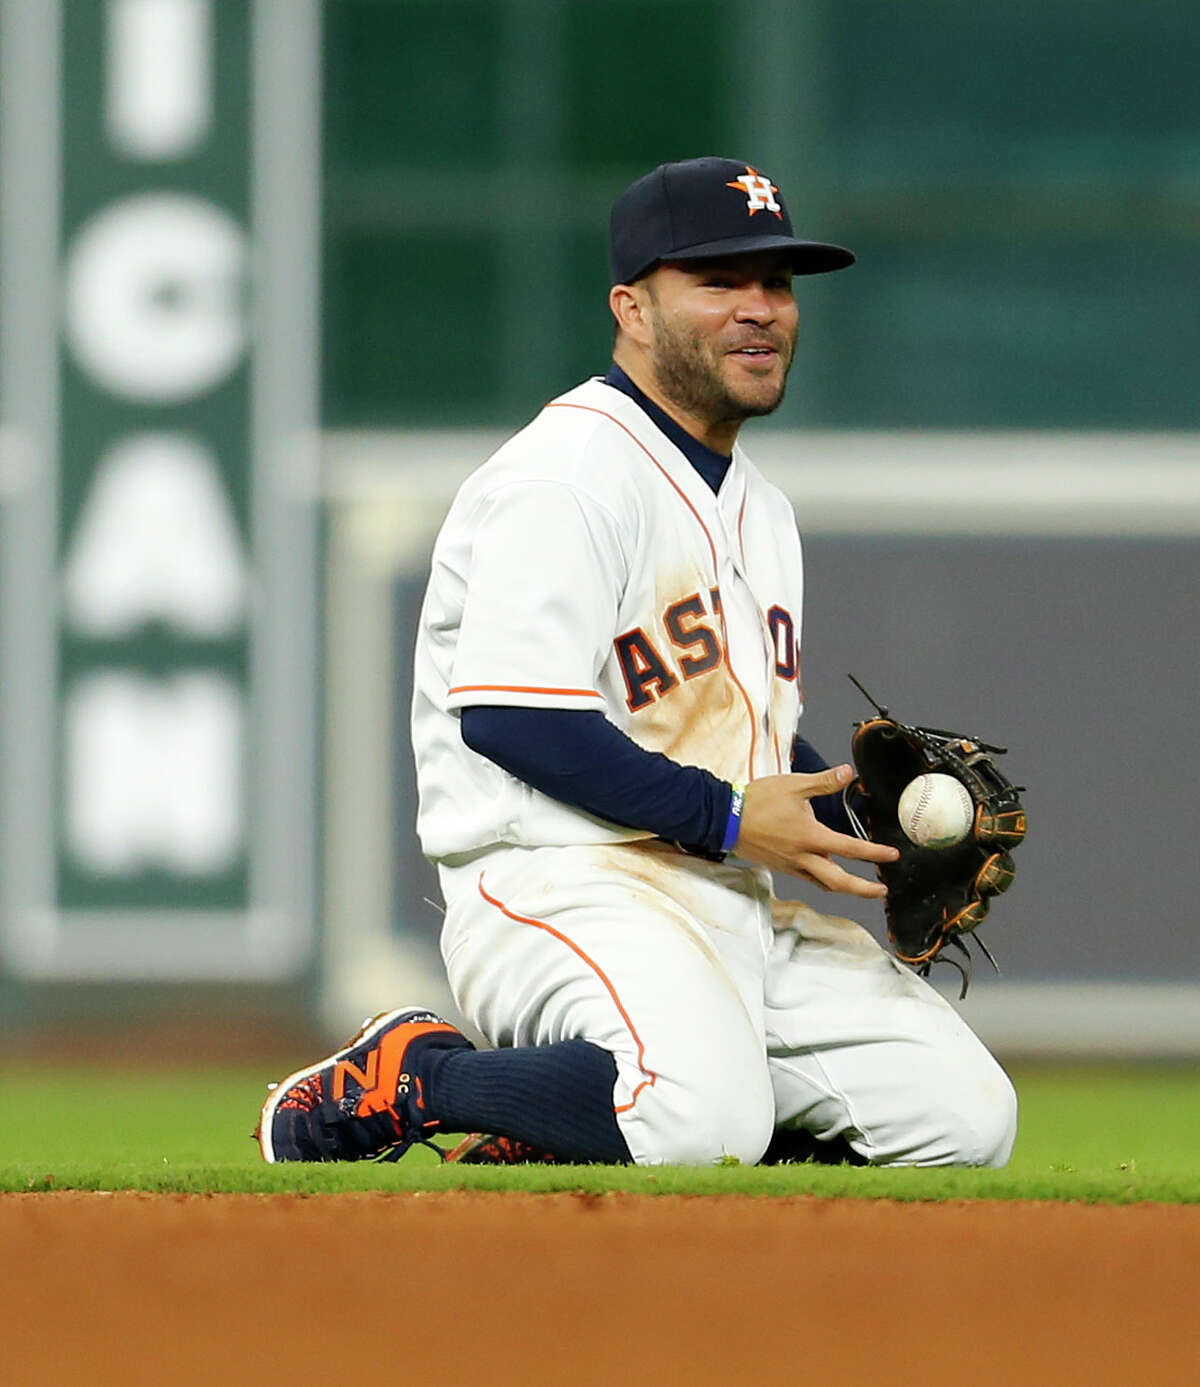 Astros second baseman Jose Altuve goes from a scare to a smile after avoiding a collision with shortstop Carlos Correa while fielding a grounder up the middle.